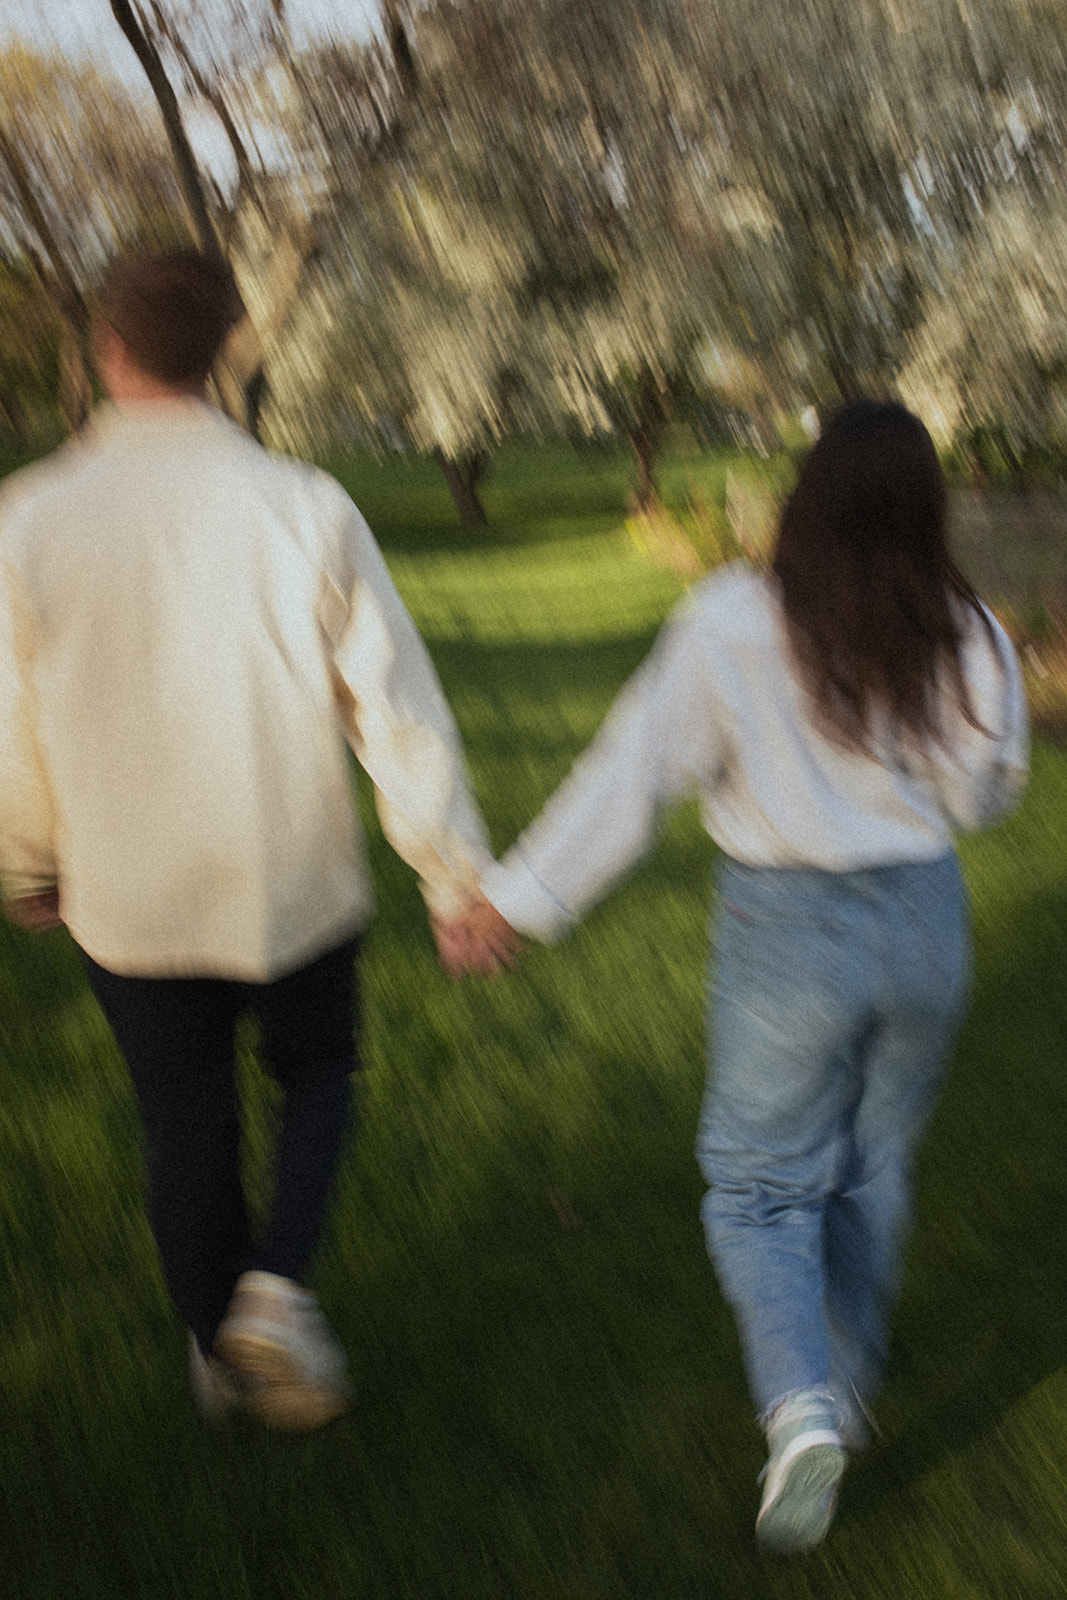 motion blur photo of couple walking together holding hands through a garden